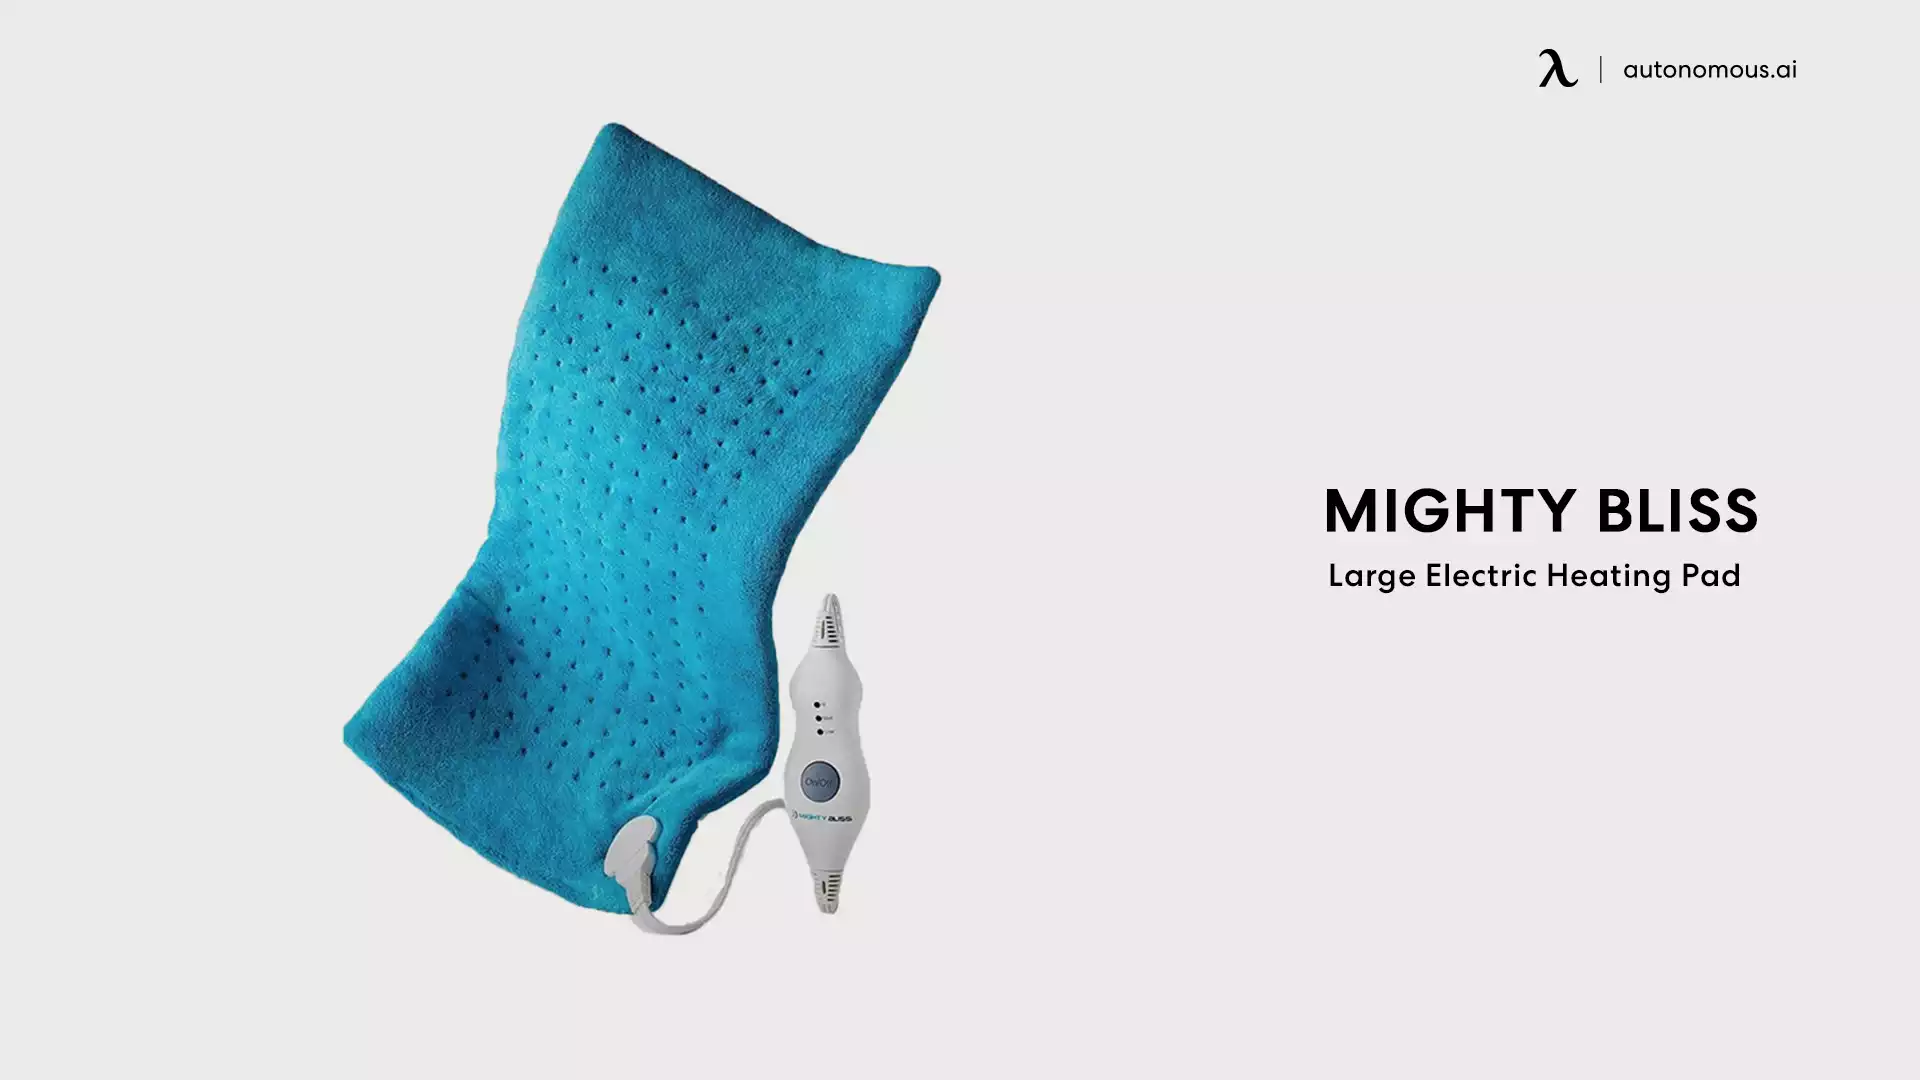 Large Electric Heating Pad from Mighty Bliss